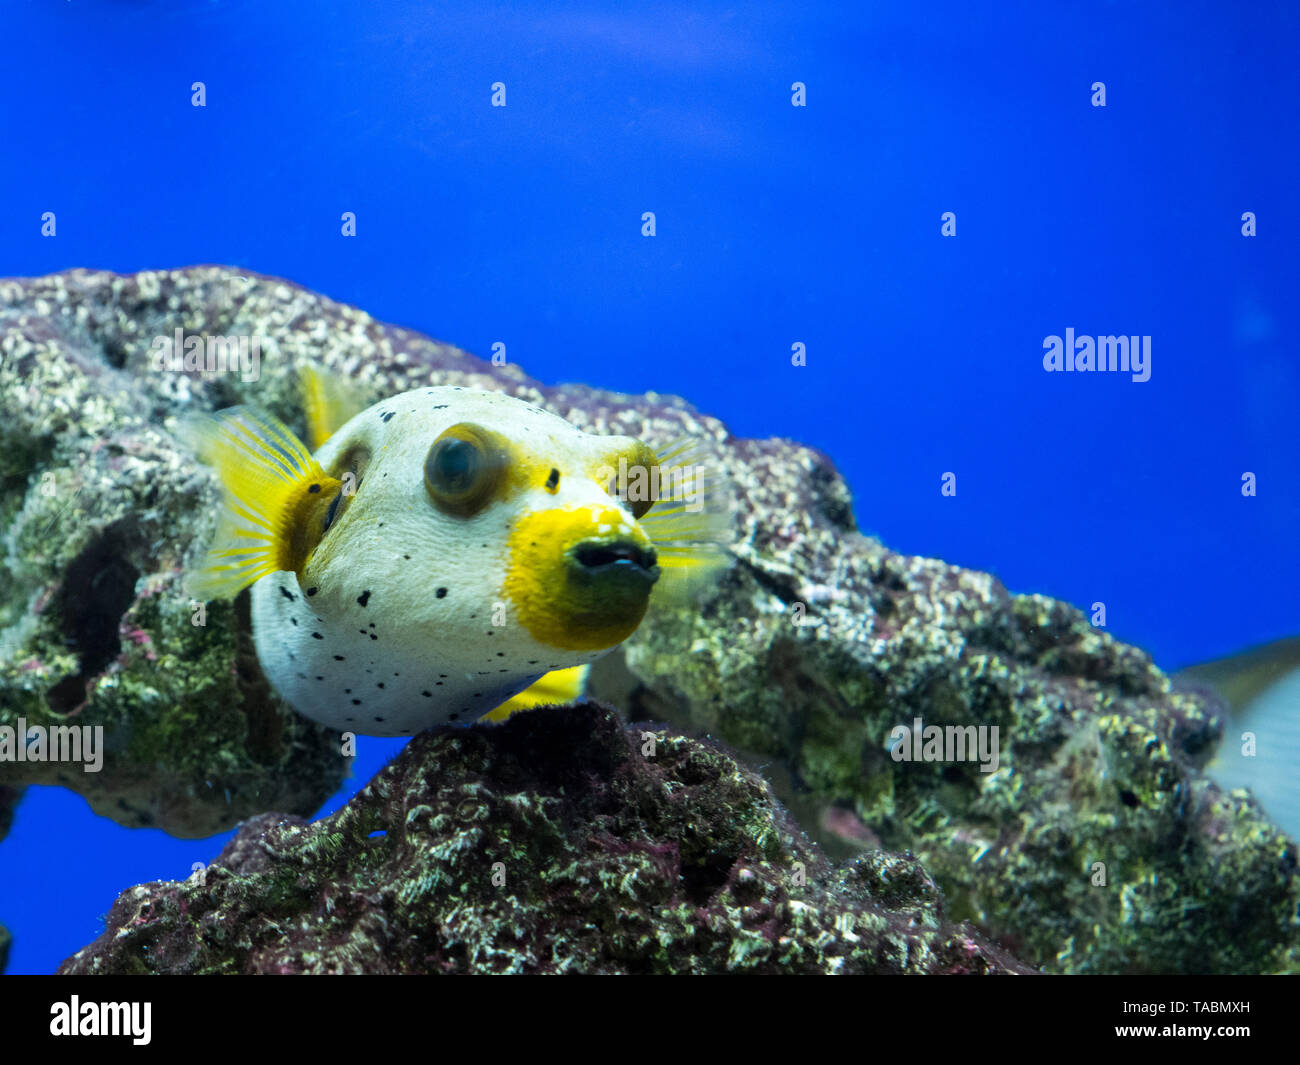 Dogface Puffer Fish High Resolution Stock Photography and Images - Alamy